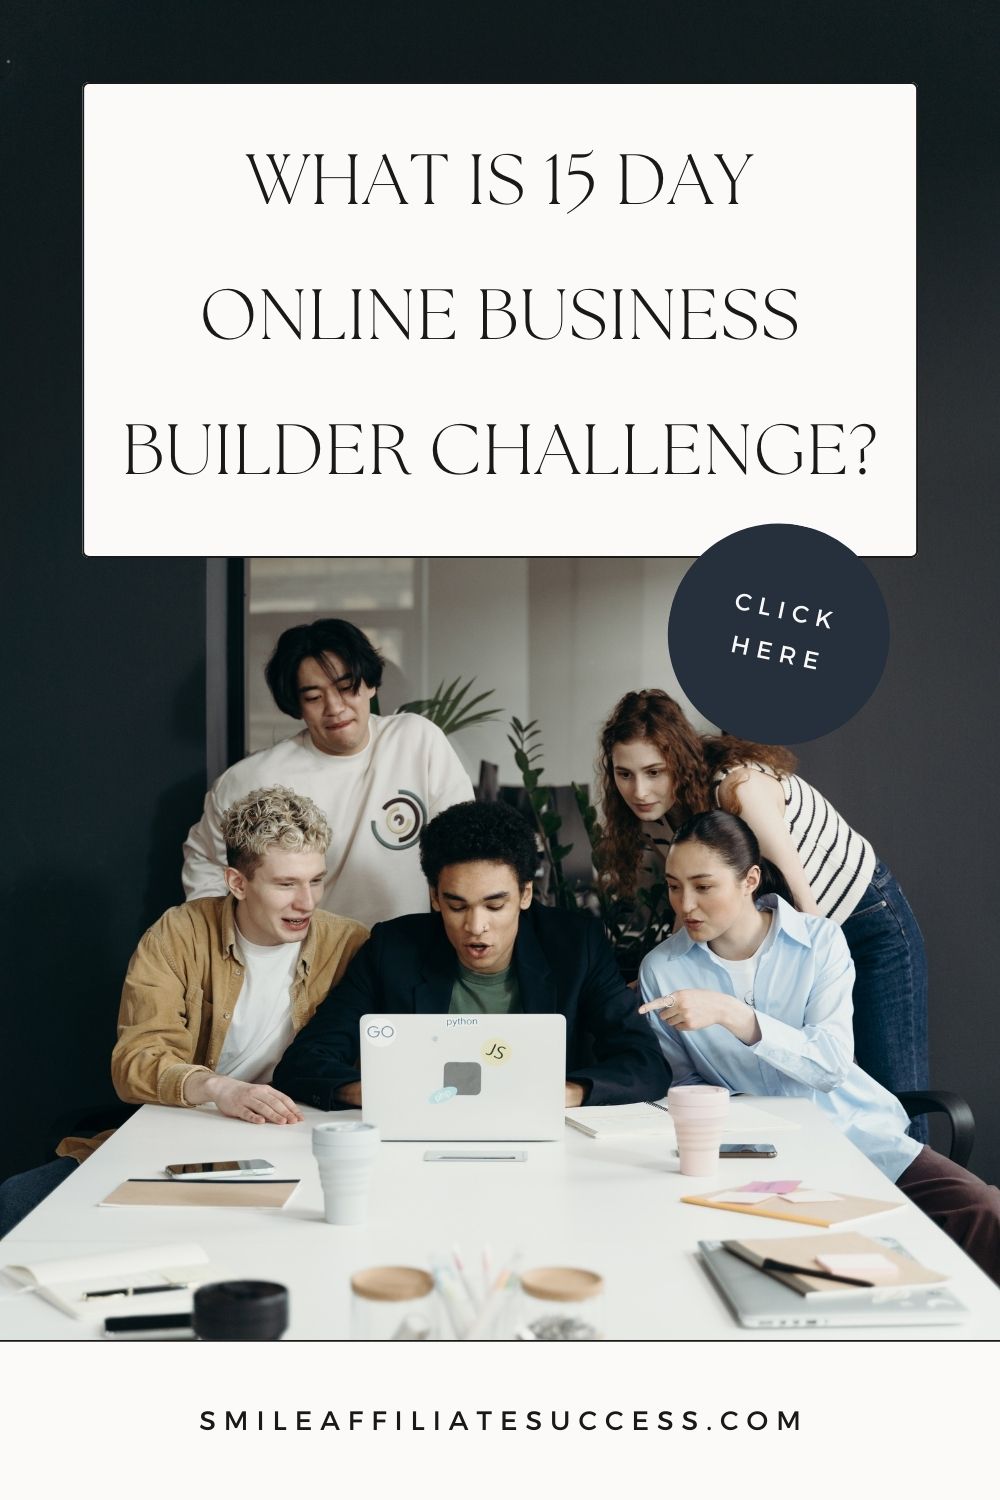 What Is 15 Day Online Business Builder Challenge?